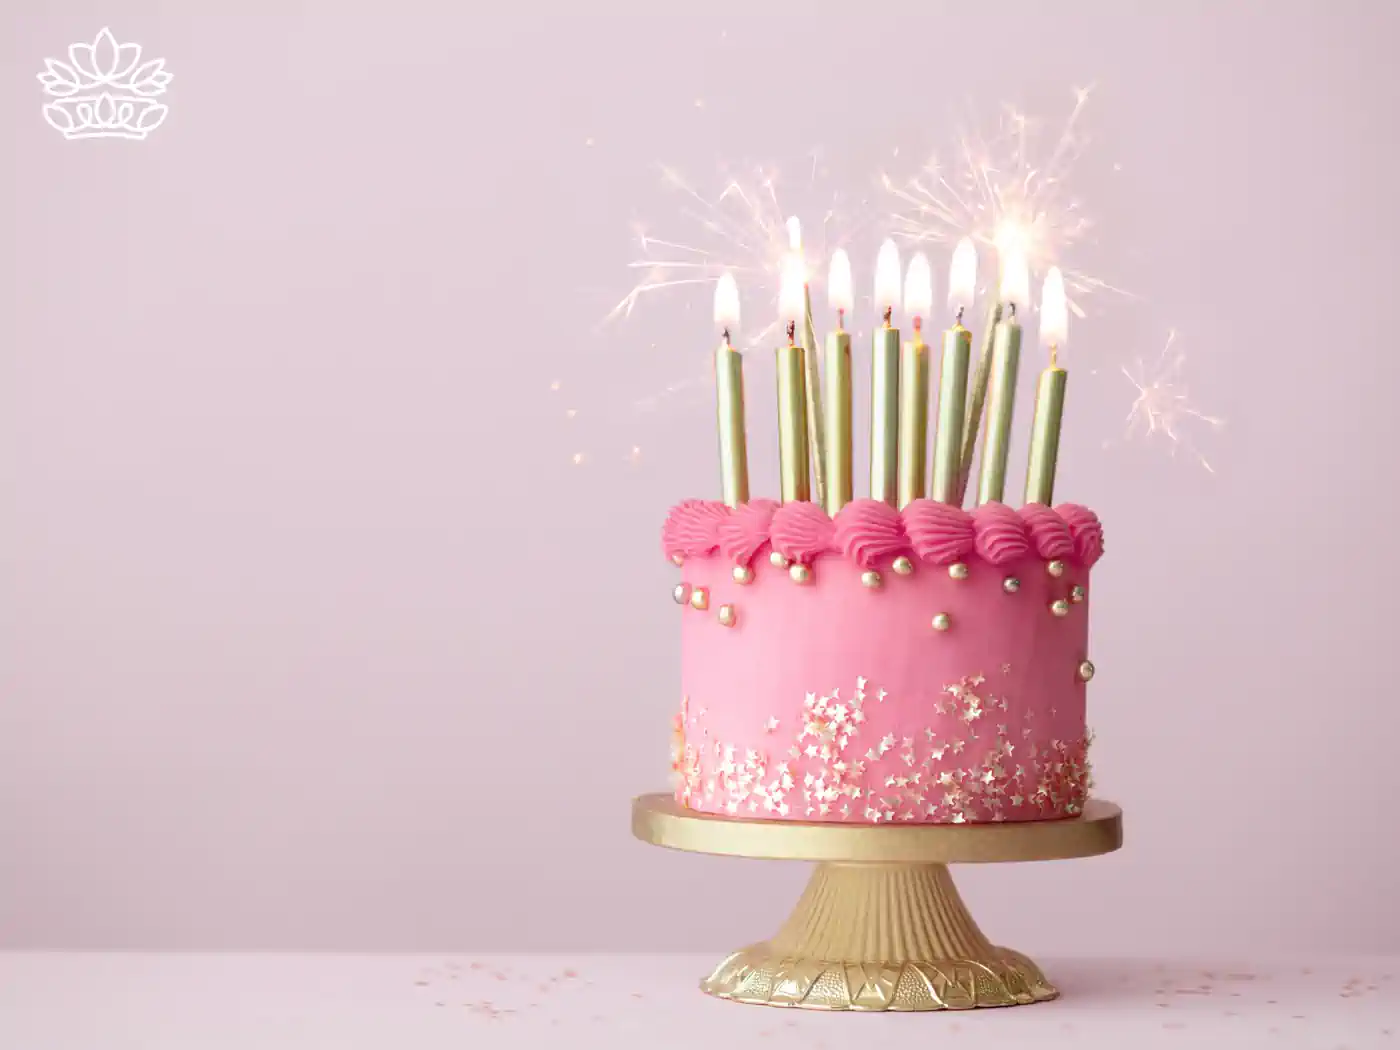 A beautifully decorated pink birthday cake with golden candles and sparklers, perfect for celebrating special occasions with style. Virgo Flowers & Gifts Collection. Fabulous Flowers and Gifts.